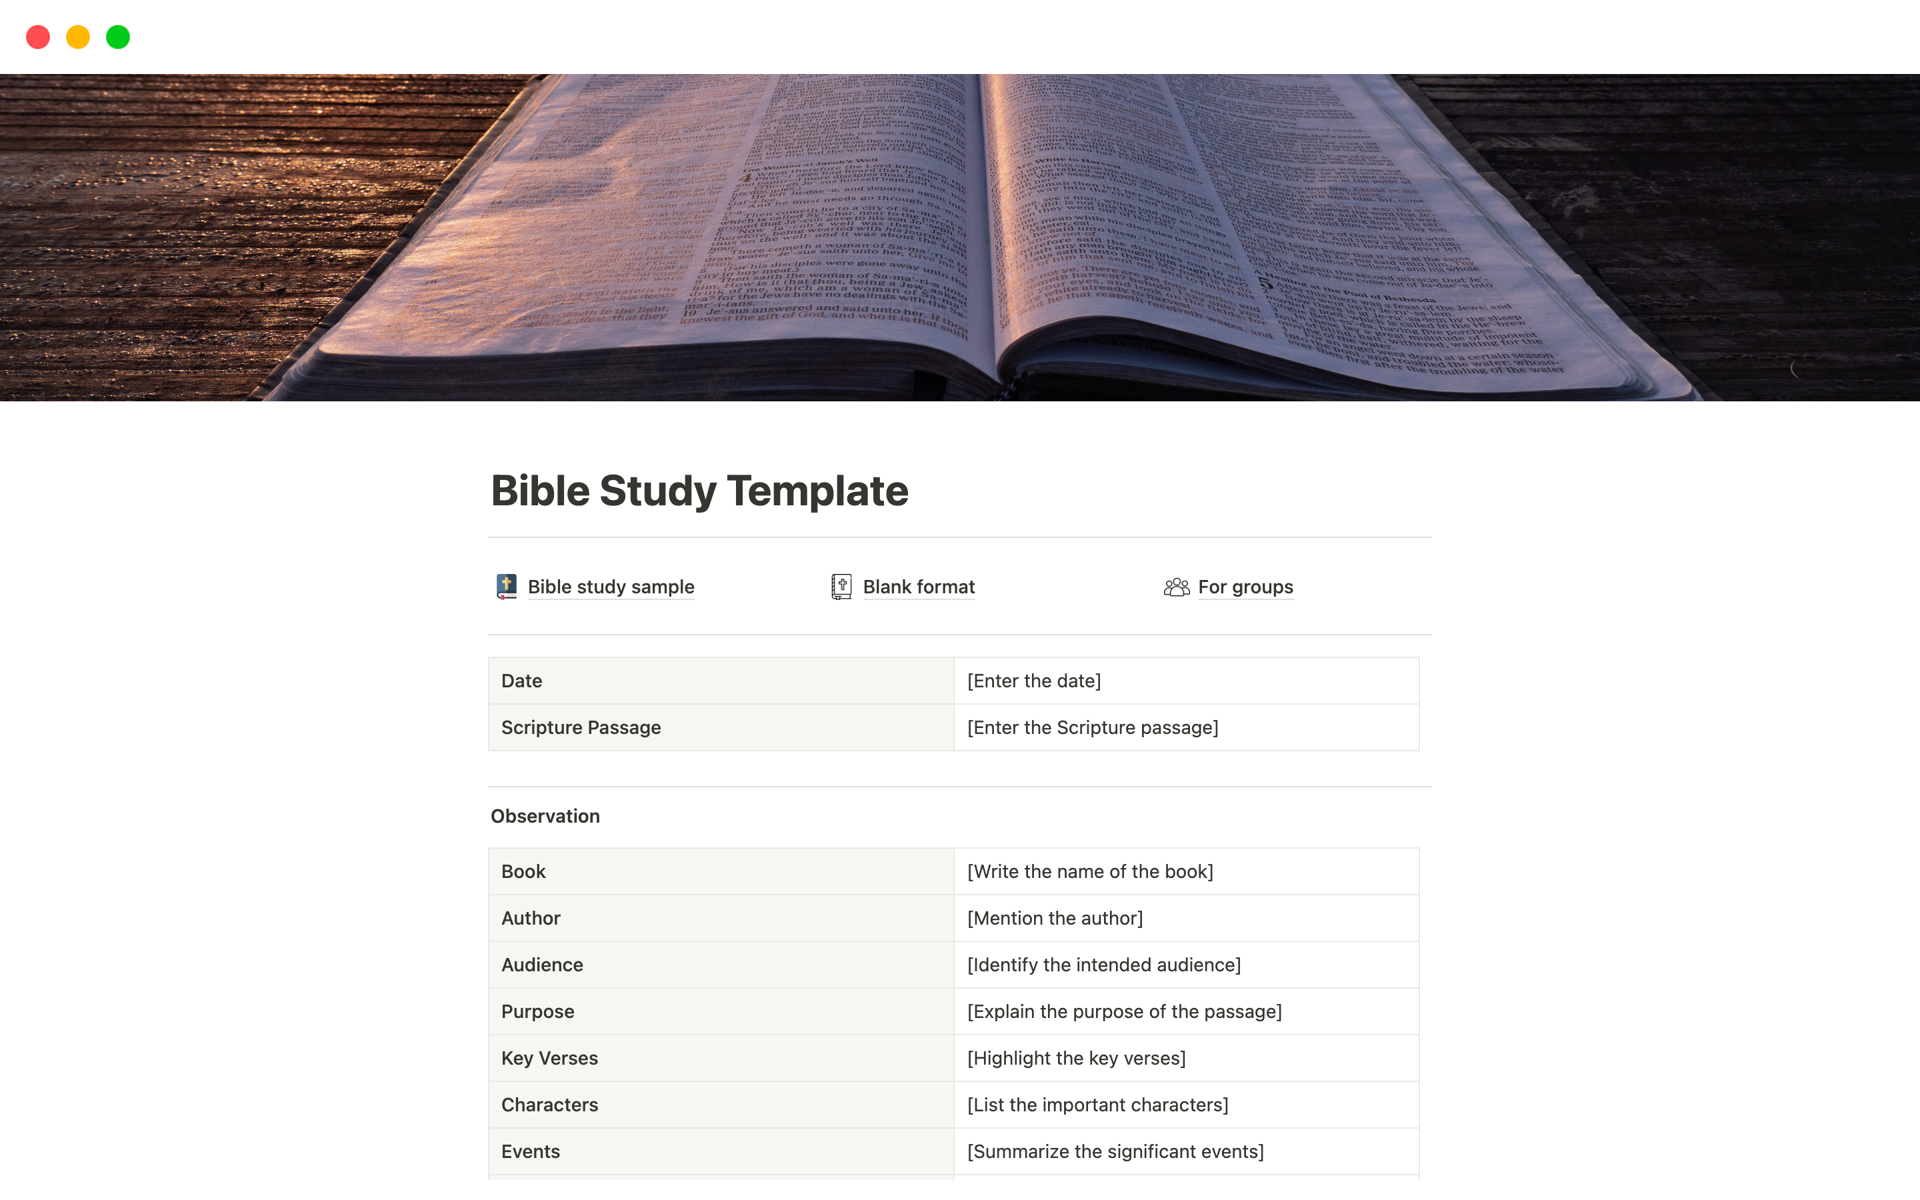 Bible study template simplifies scripture study, promoting deeper understanding, personal reflection, and focused prayer.